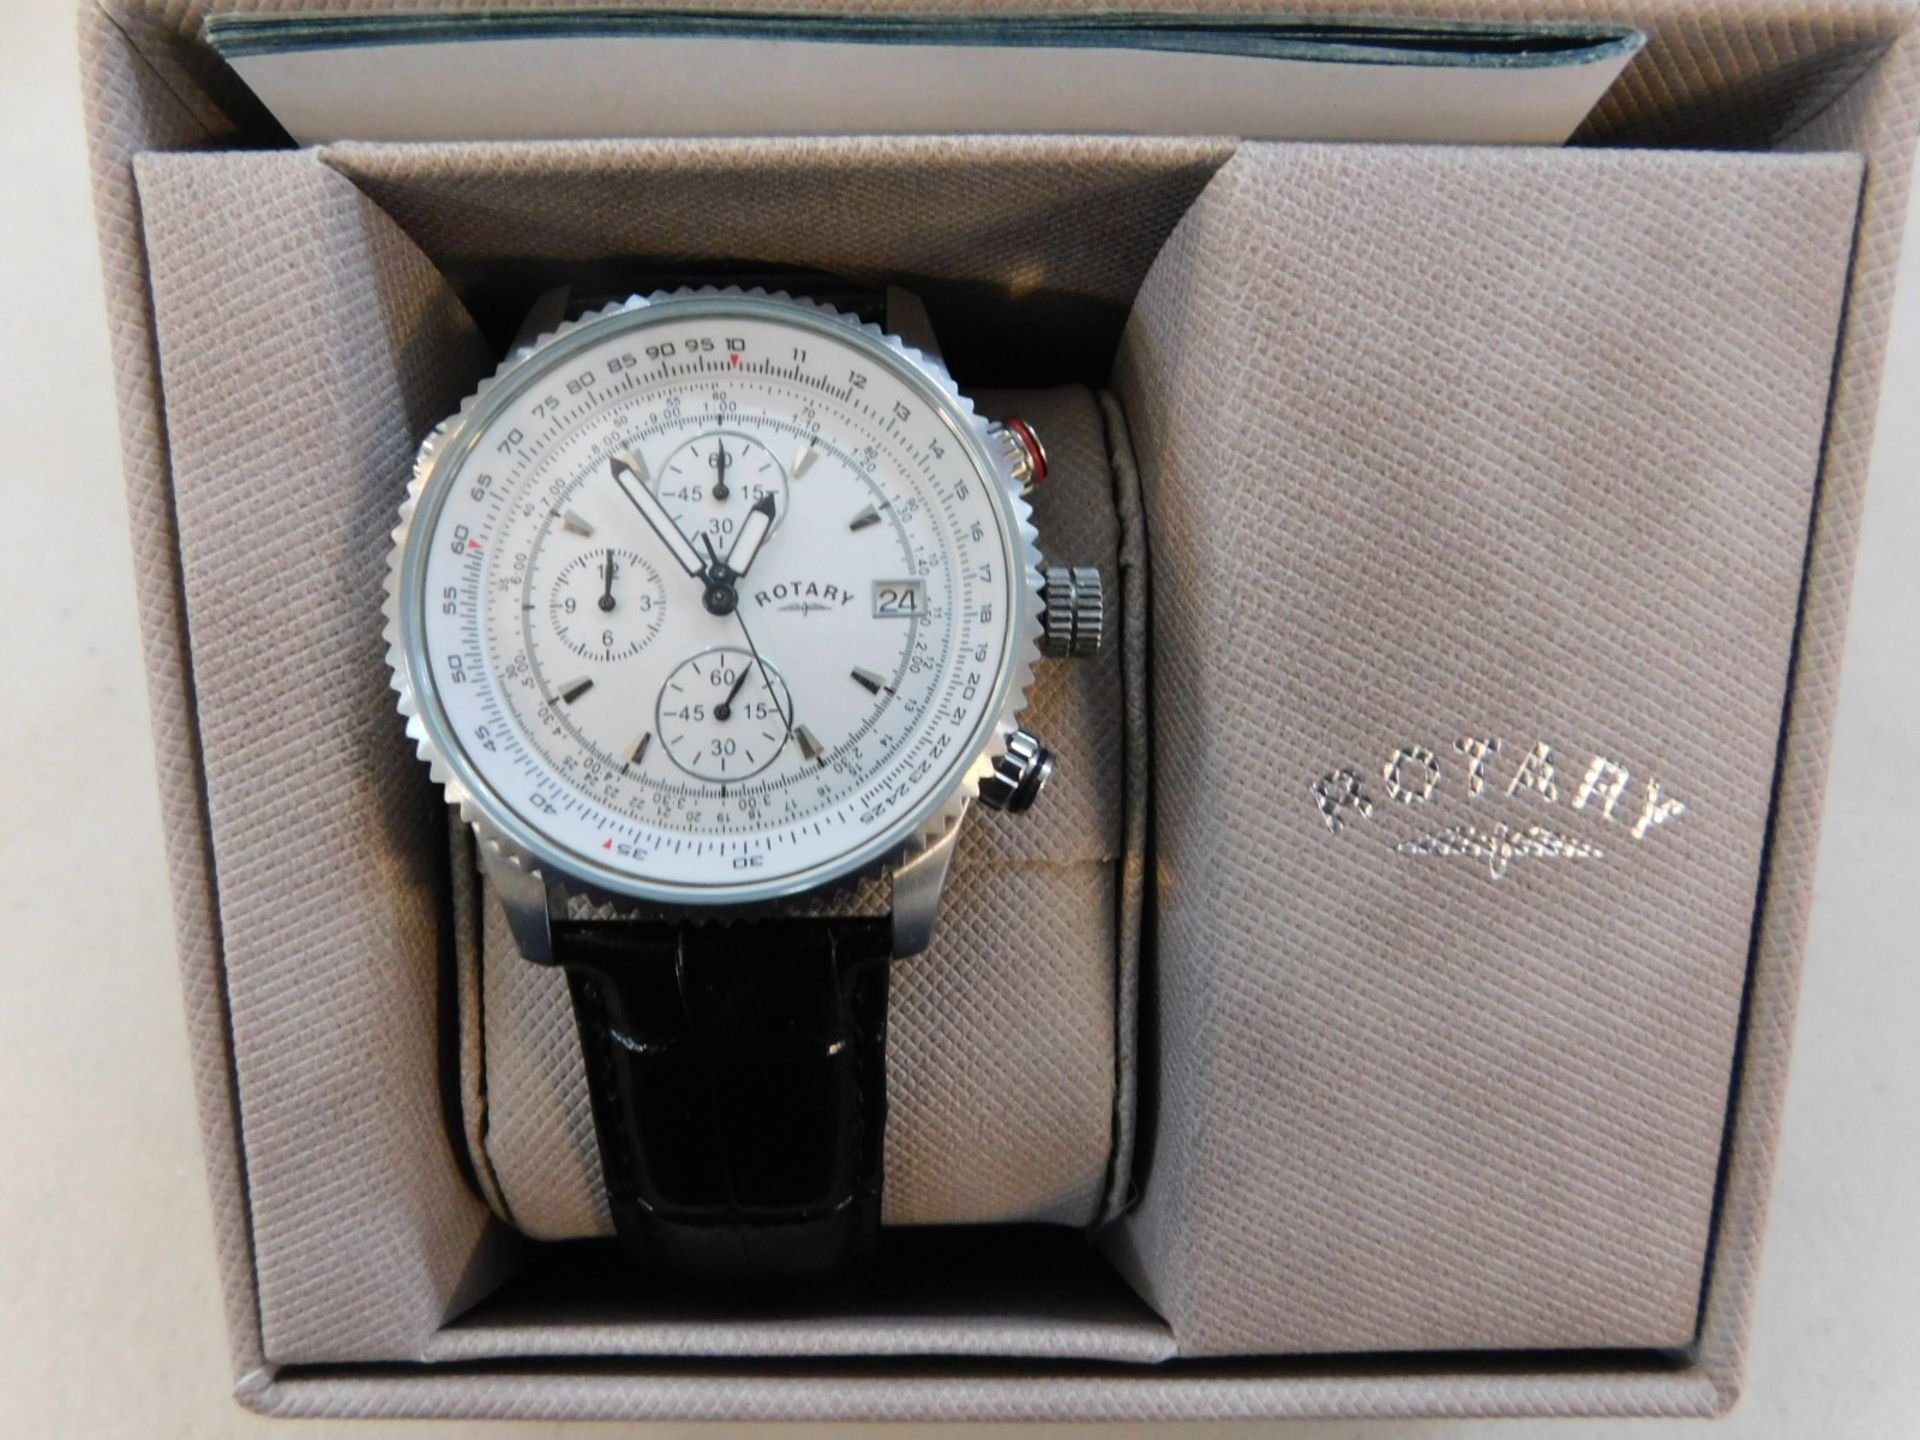 1 BOXED ROTARY GENTS CHRONOGRAPH WATCH MODEL GS00328/01 RRP Â£199